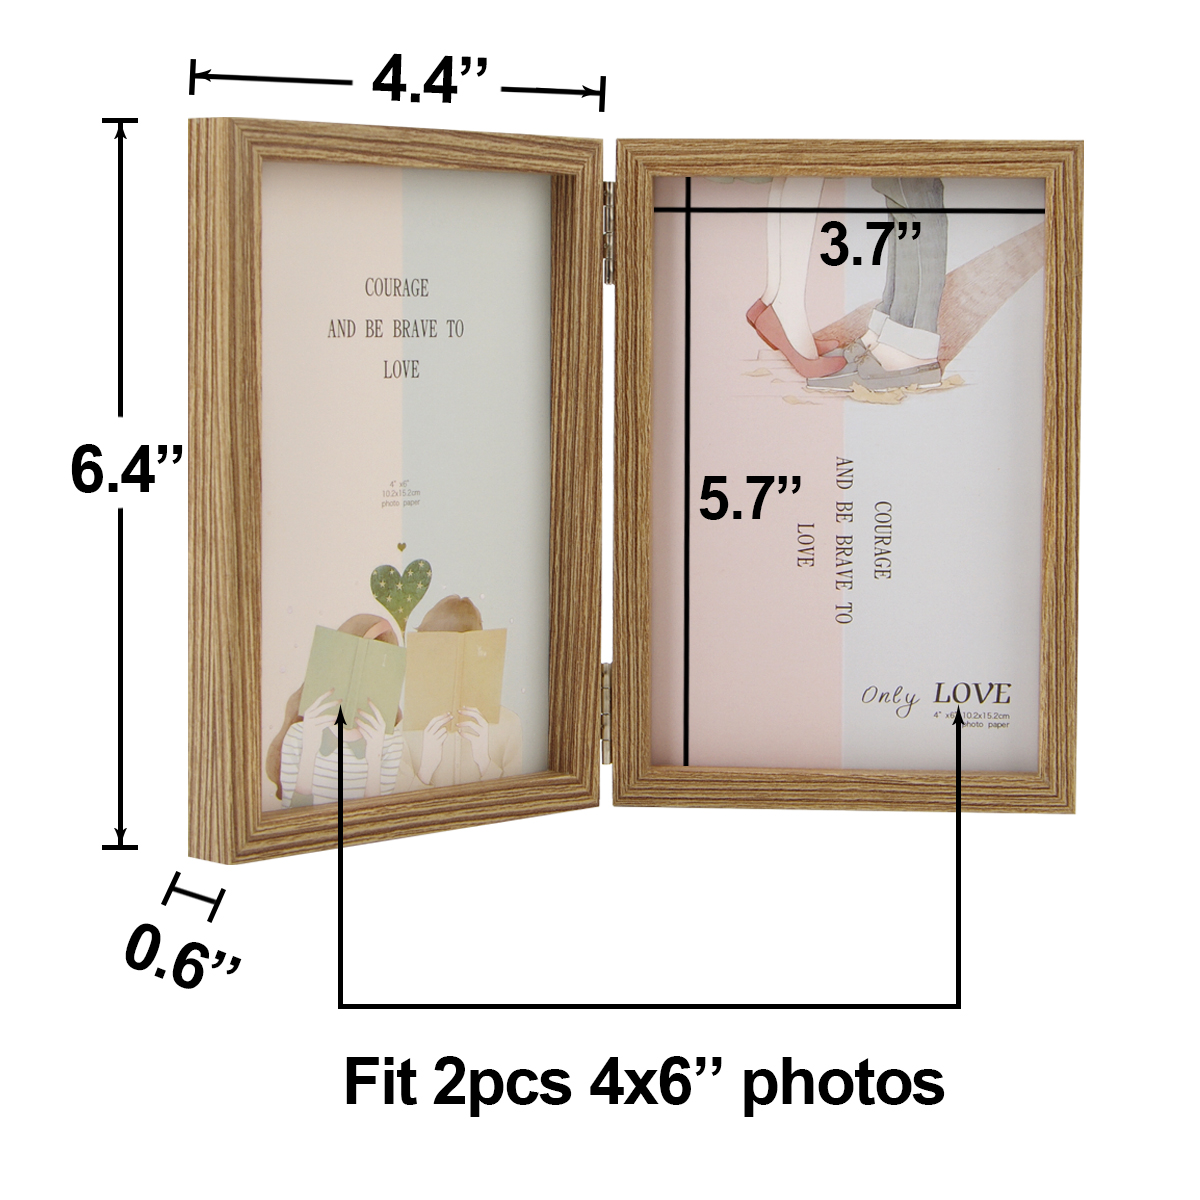 3 Pack of MDF New Grace Picture Frames 4x6 Inches - Natural Wood Grain